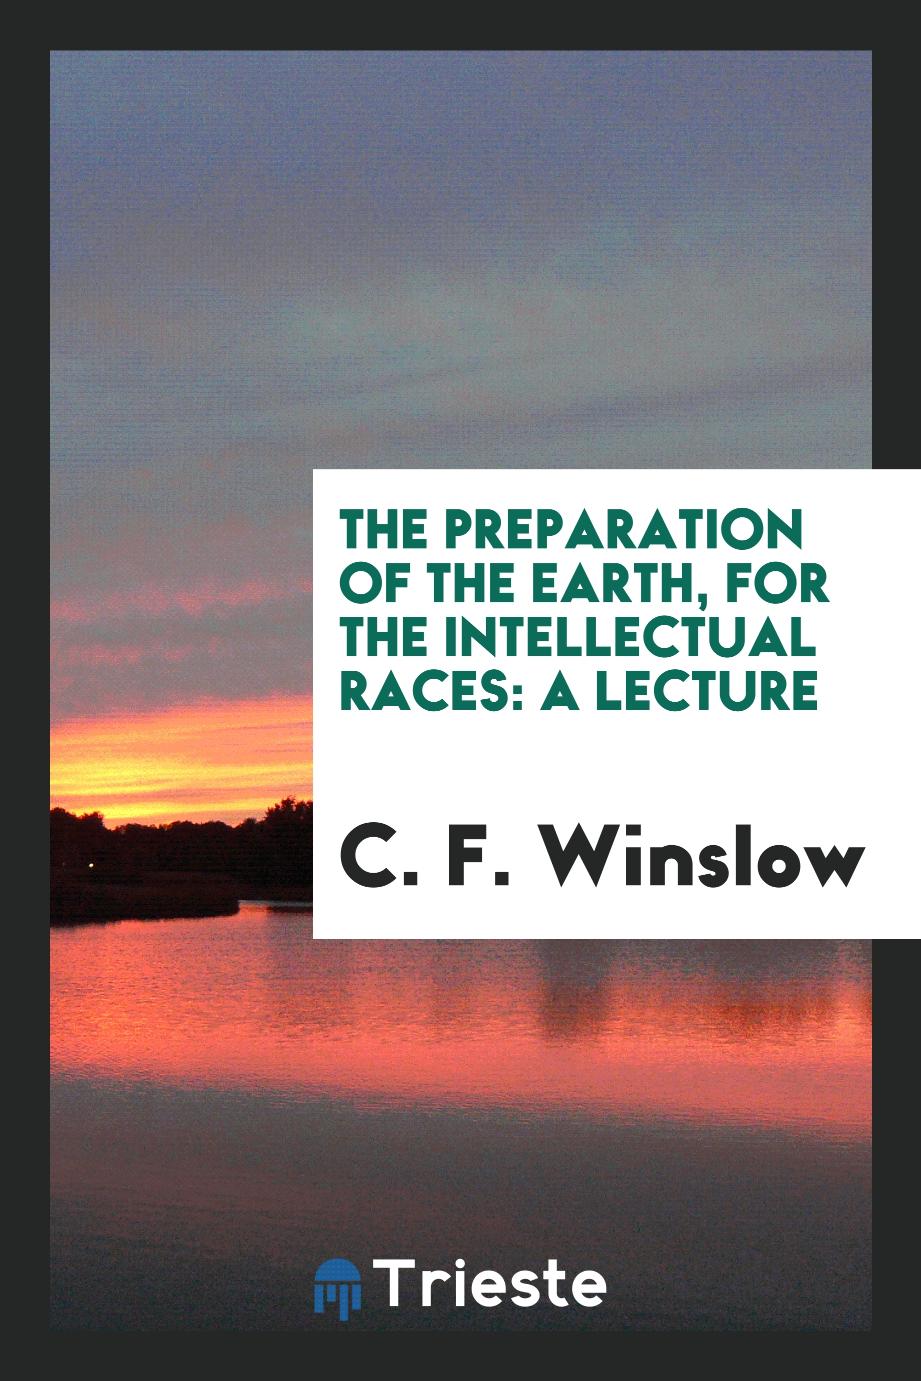 The preparation of the earth, for the intellectual races: a lecture